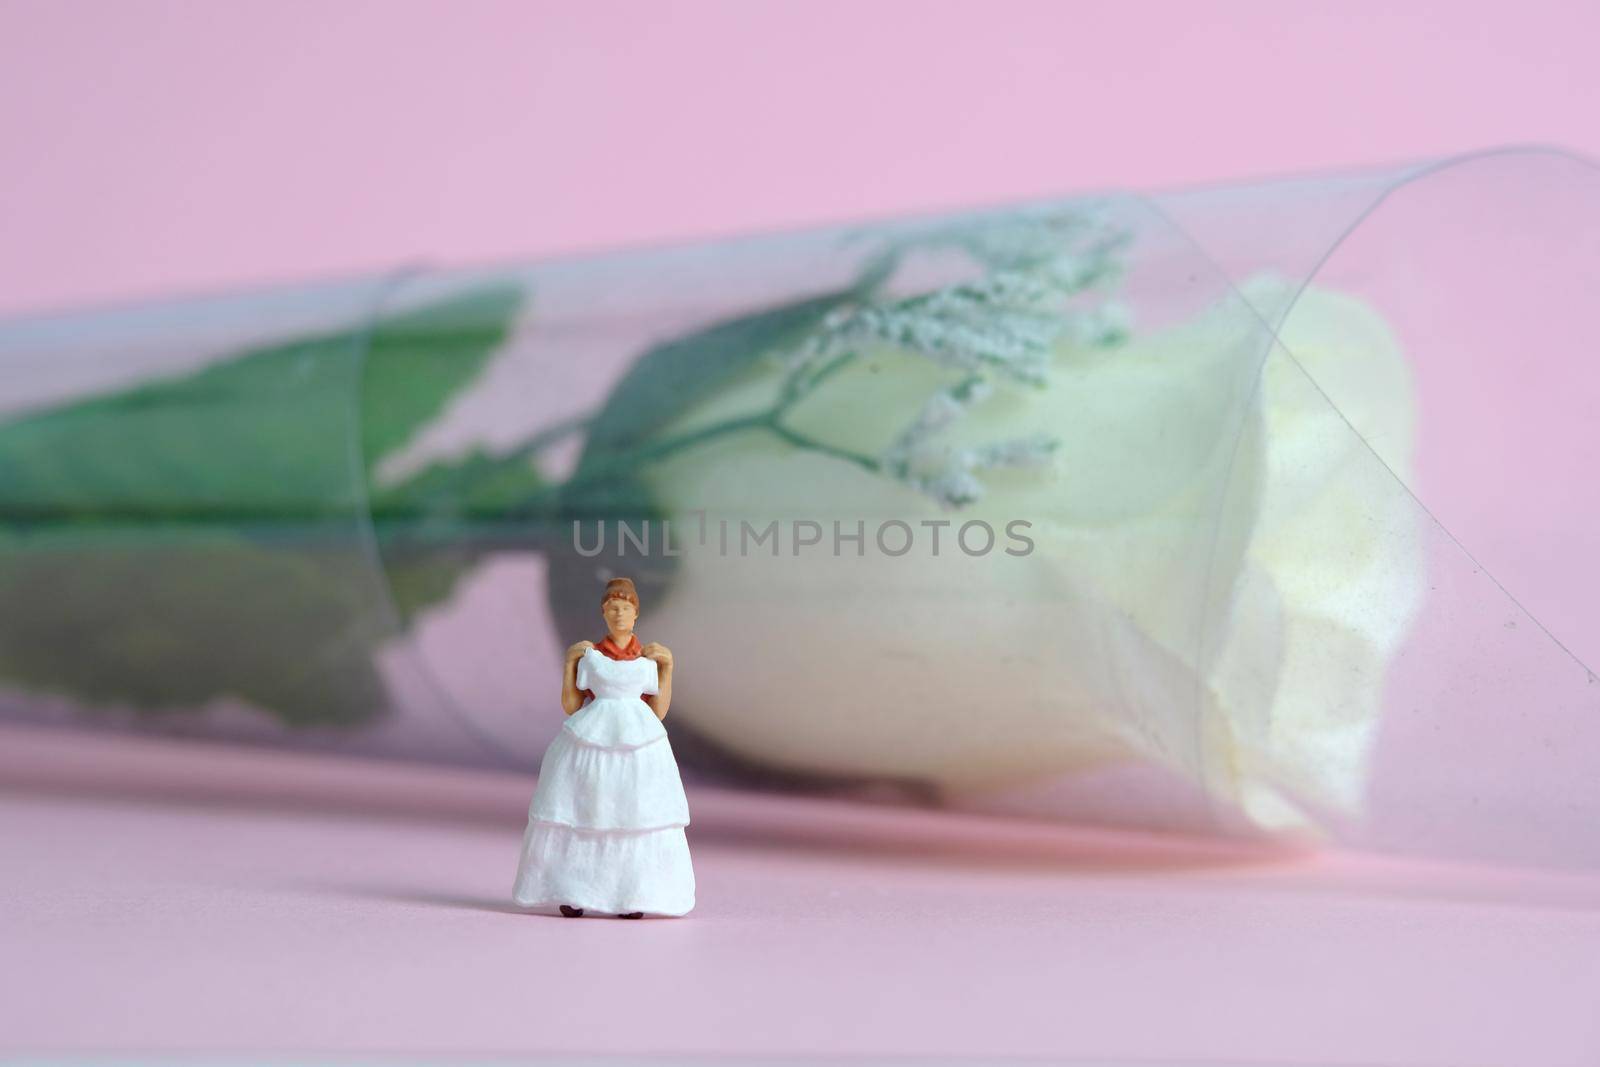 Women miniature people fitting wedding dress standing in front of white rose flower, isolated pink background. Image photo by Macrostud